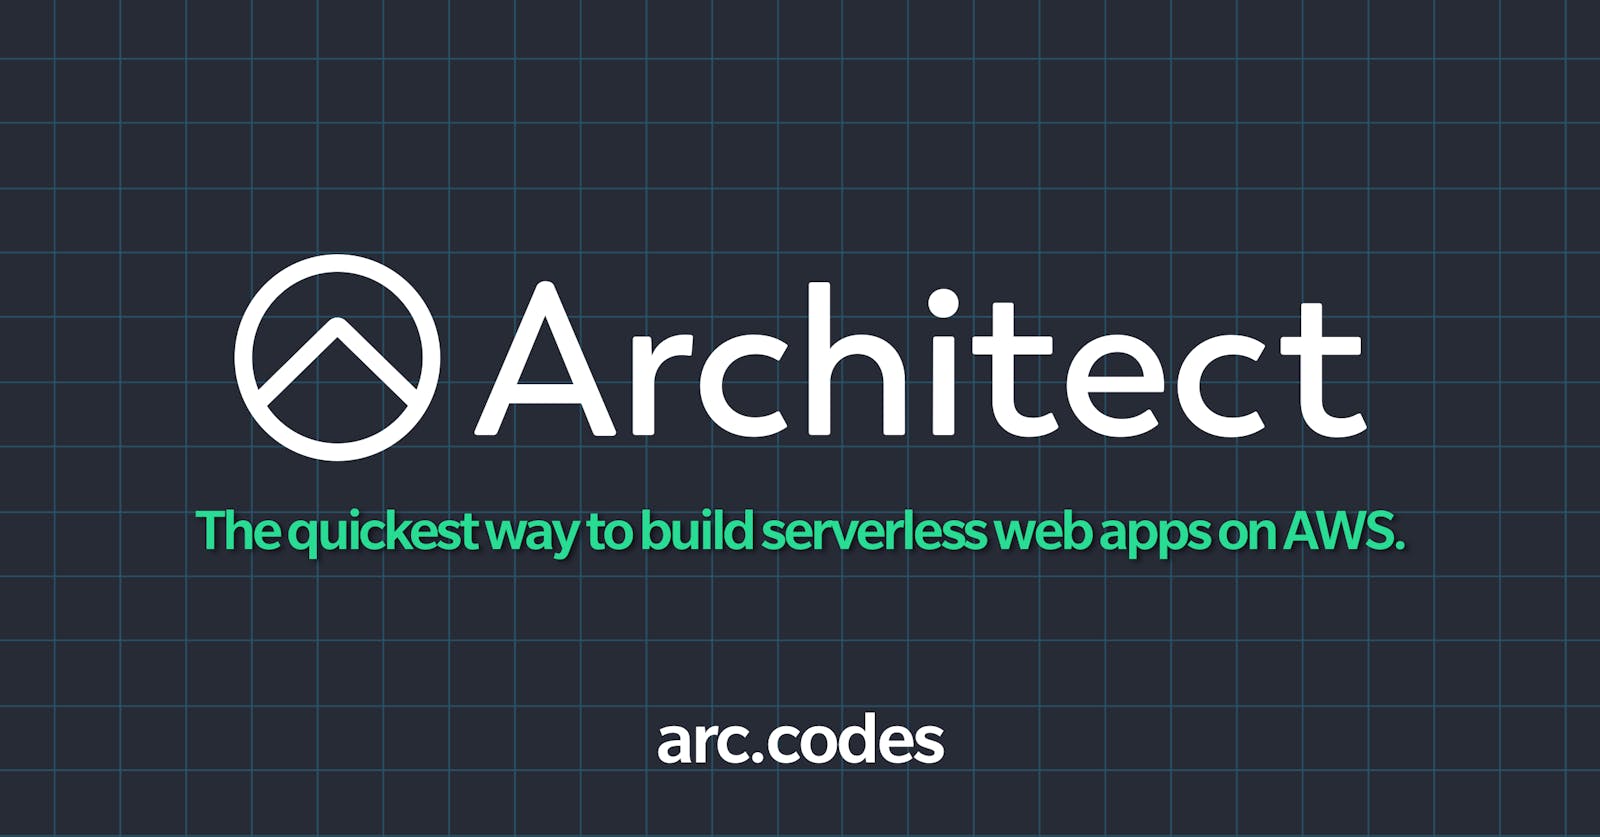 Architect an easy way to jump into the serverless world